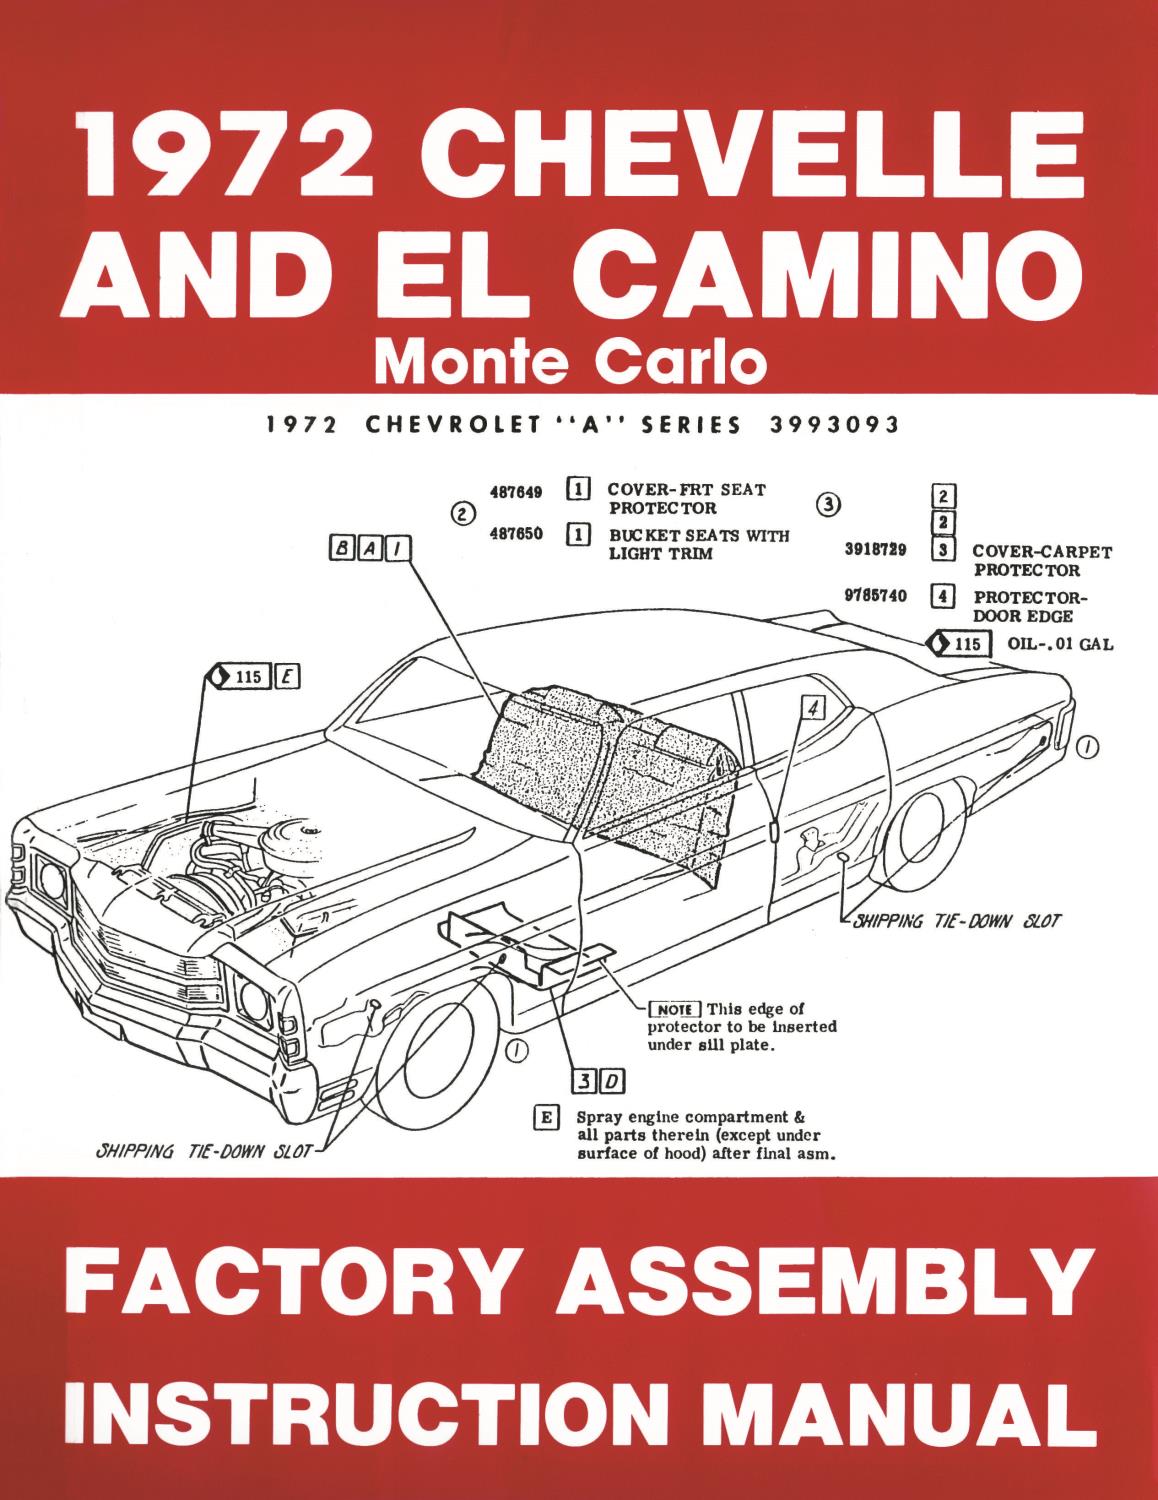 Factory Assembly Instruction Manual for 1972 Chevrolet Chevelle, El Camino and Monte Carlo